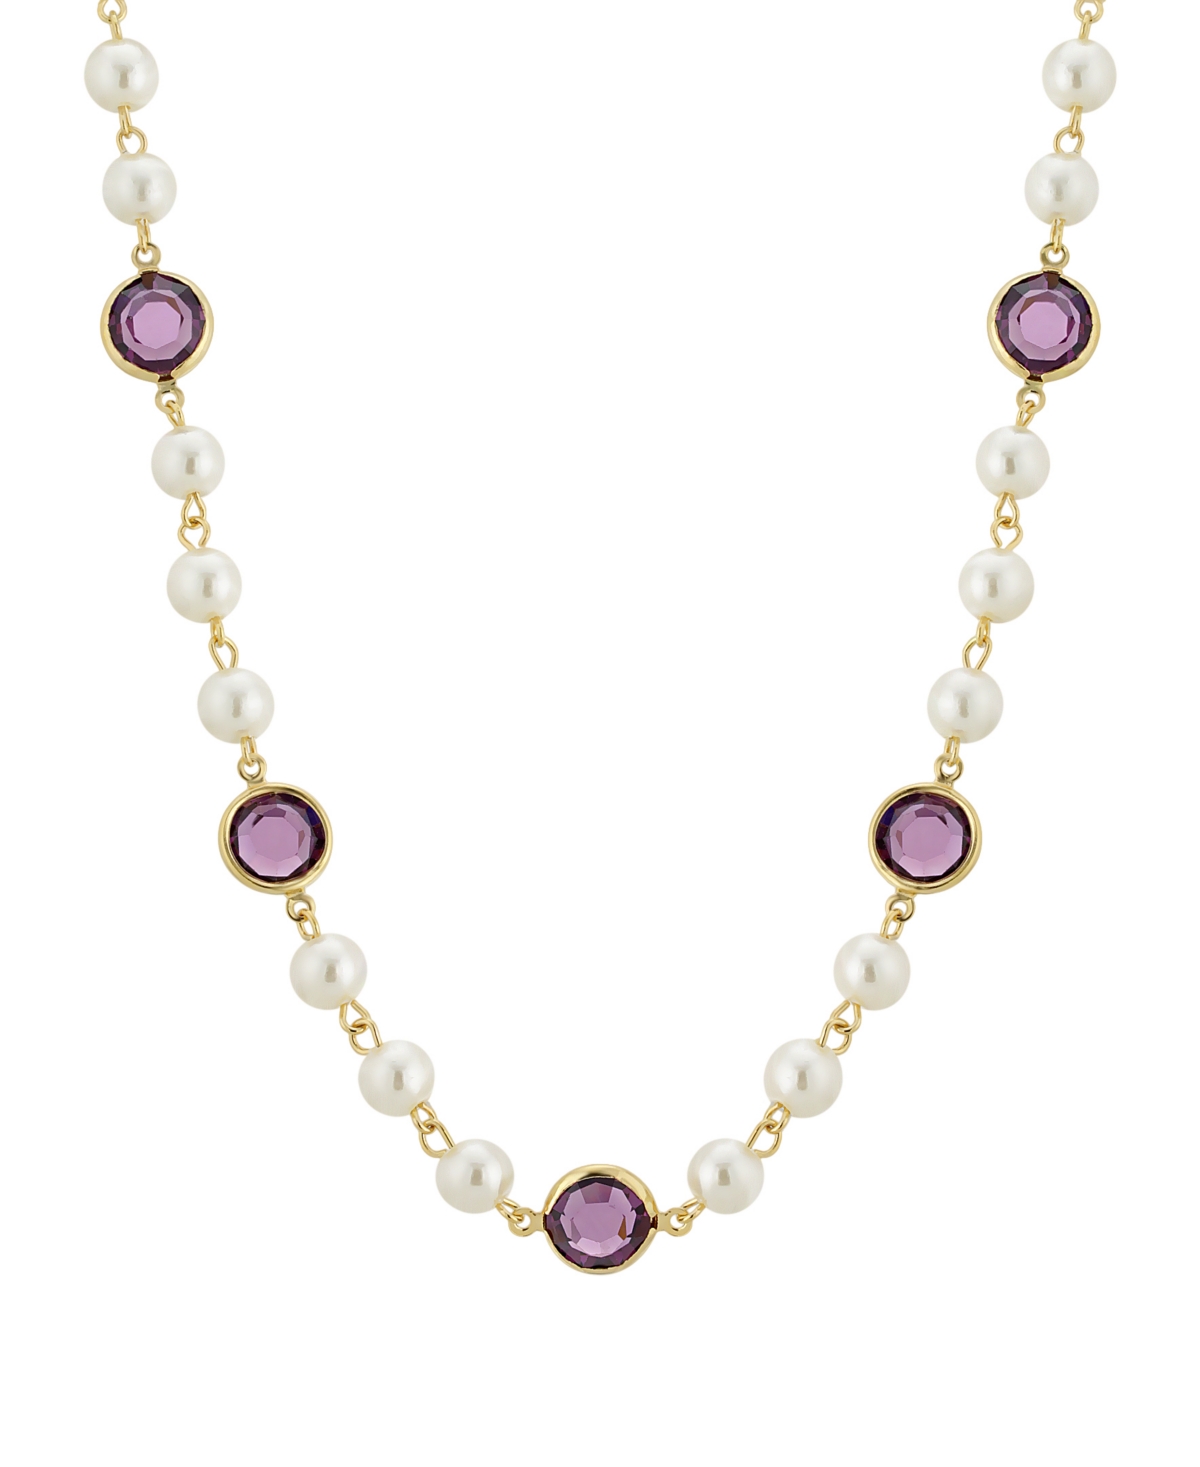 2028 Gold-tone Imitation Pearl With Purple Channels 16" Adjustable Necklace